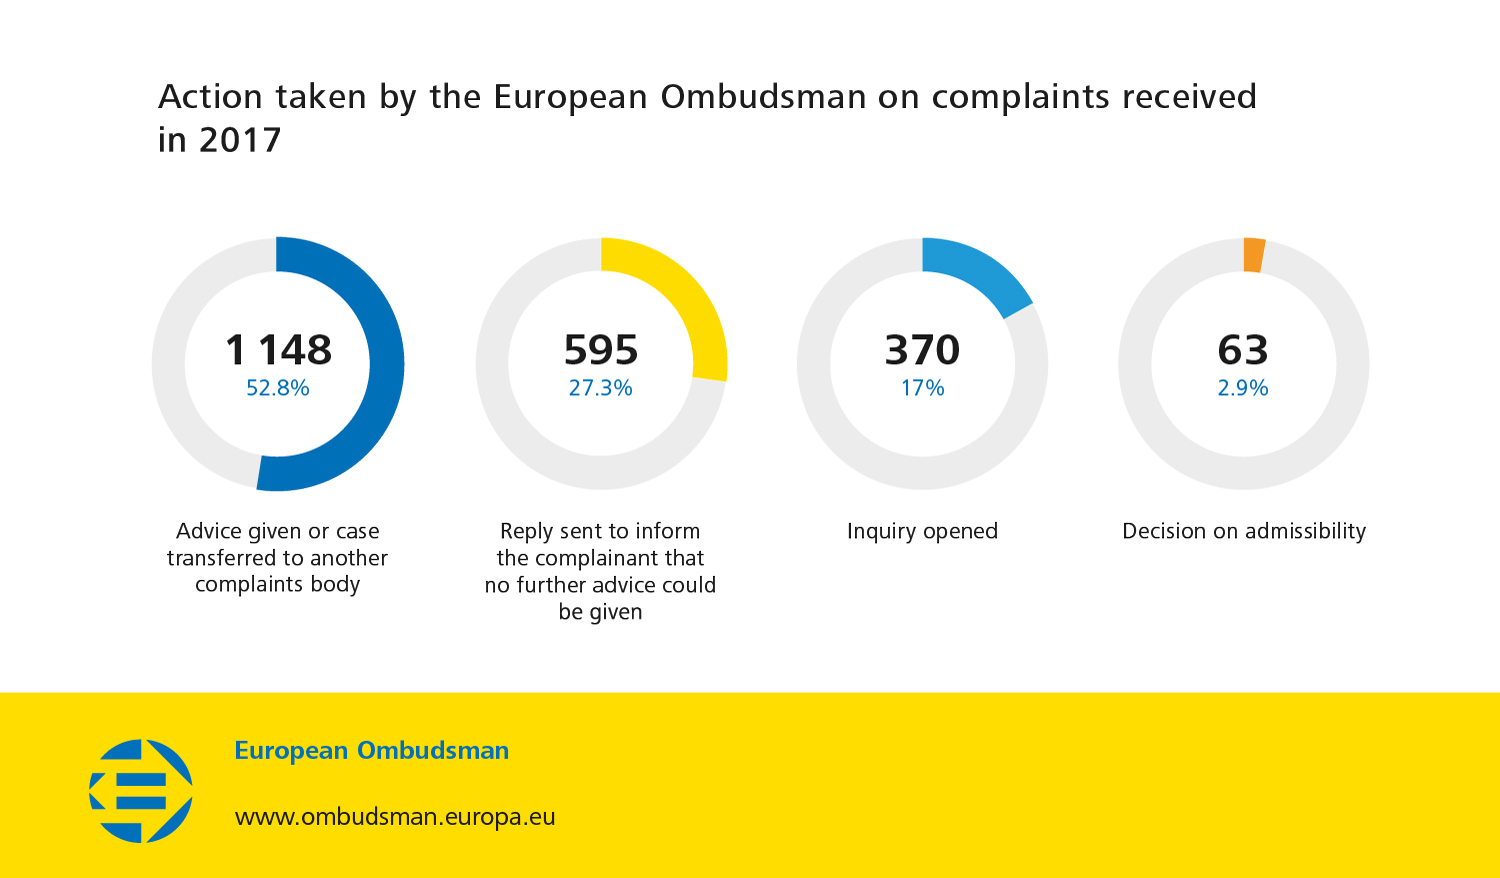 Action taken by the European Ombudsman on complaints received in 2017